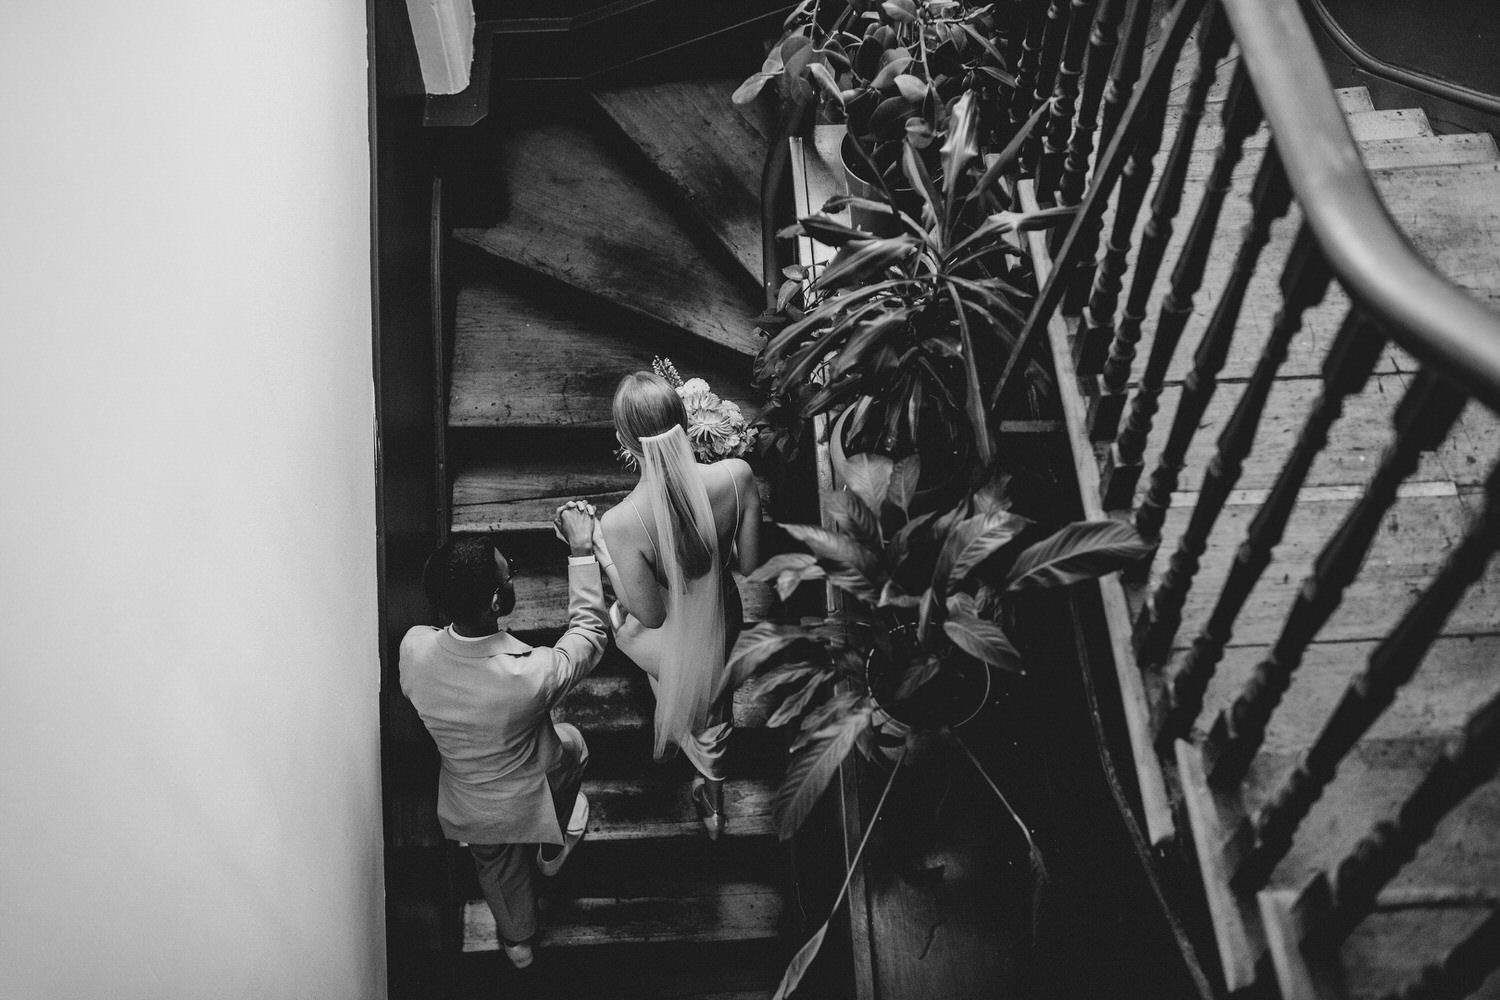 Elegant modern wedding photography by Ellie Gillard. A bride and groom ascend the stairs in a grand wedding venue. The photo is in black and white and taken from above.